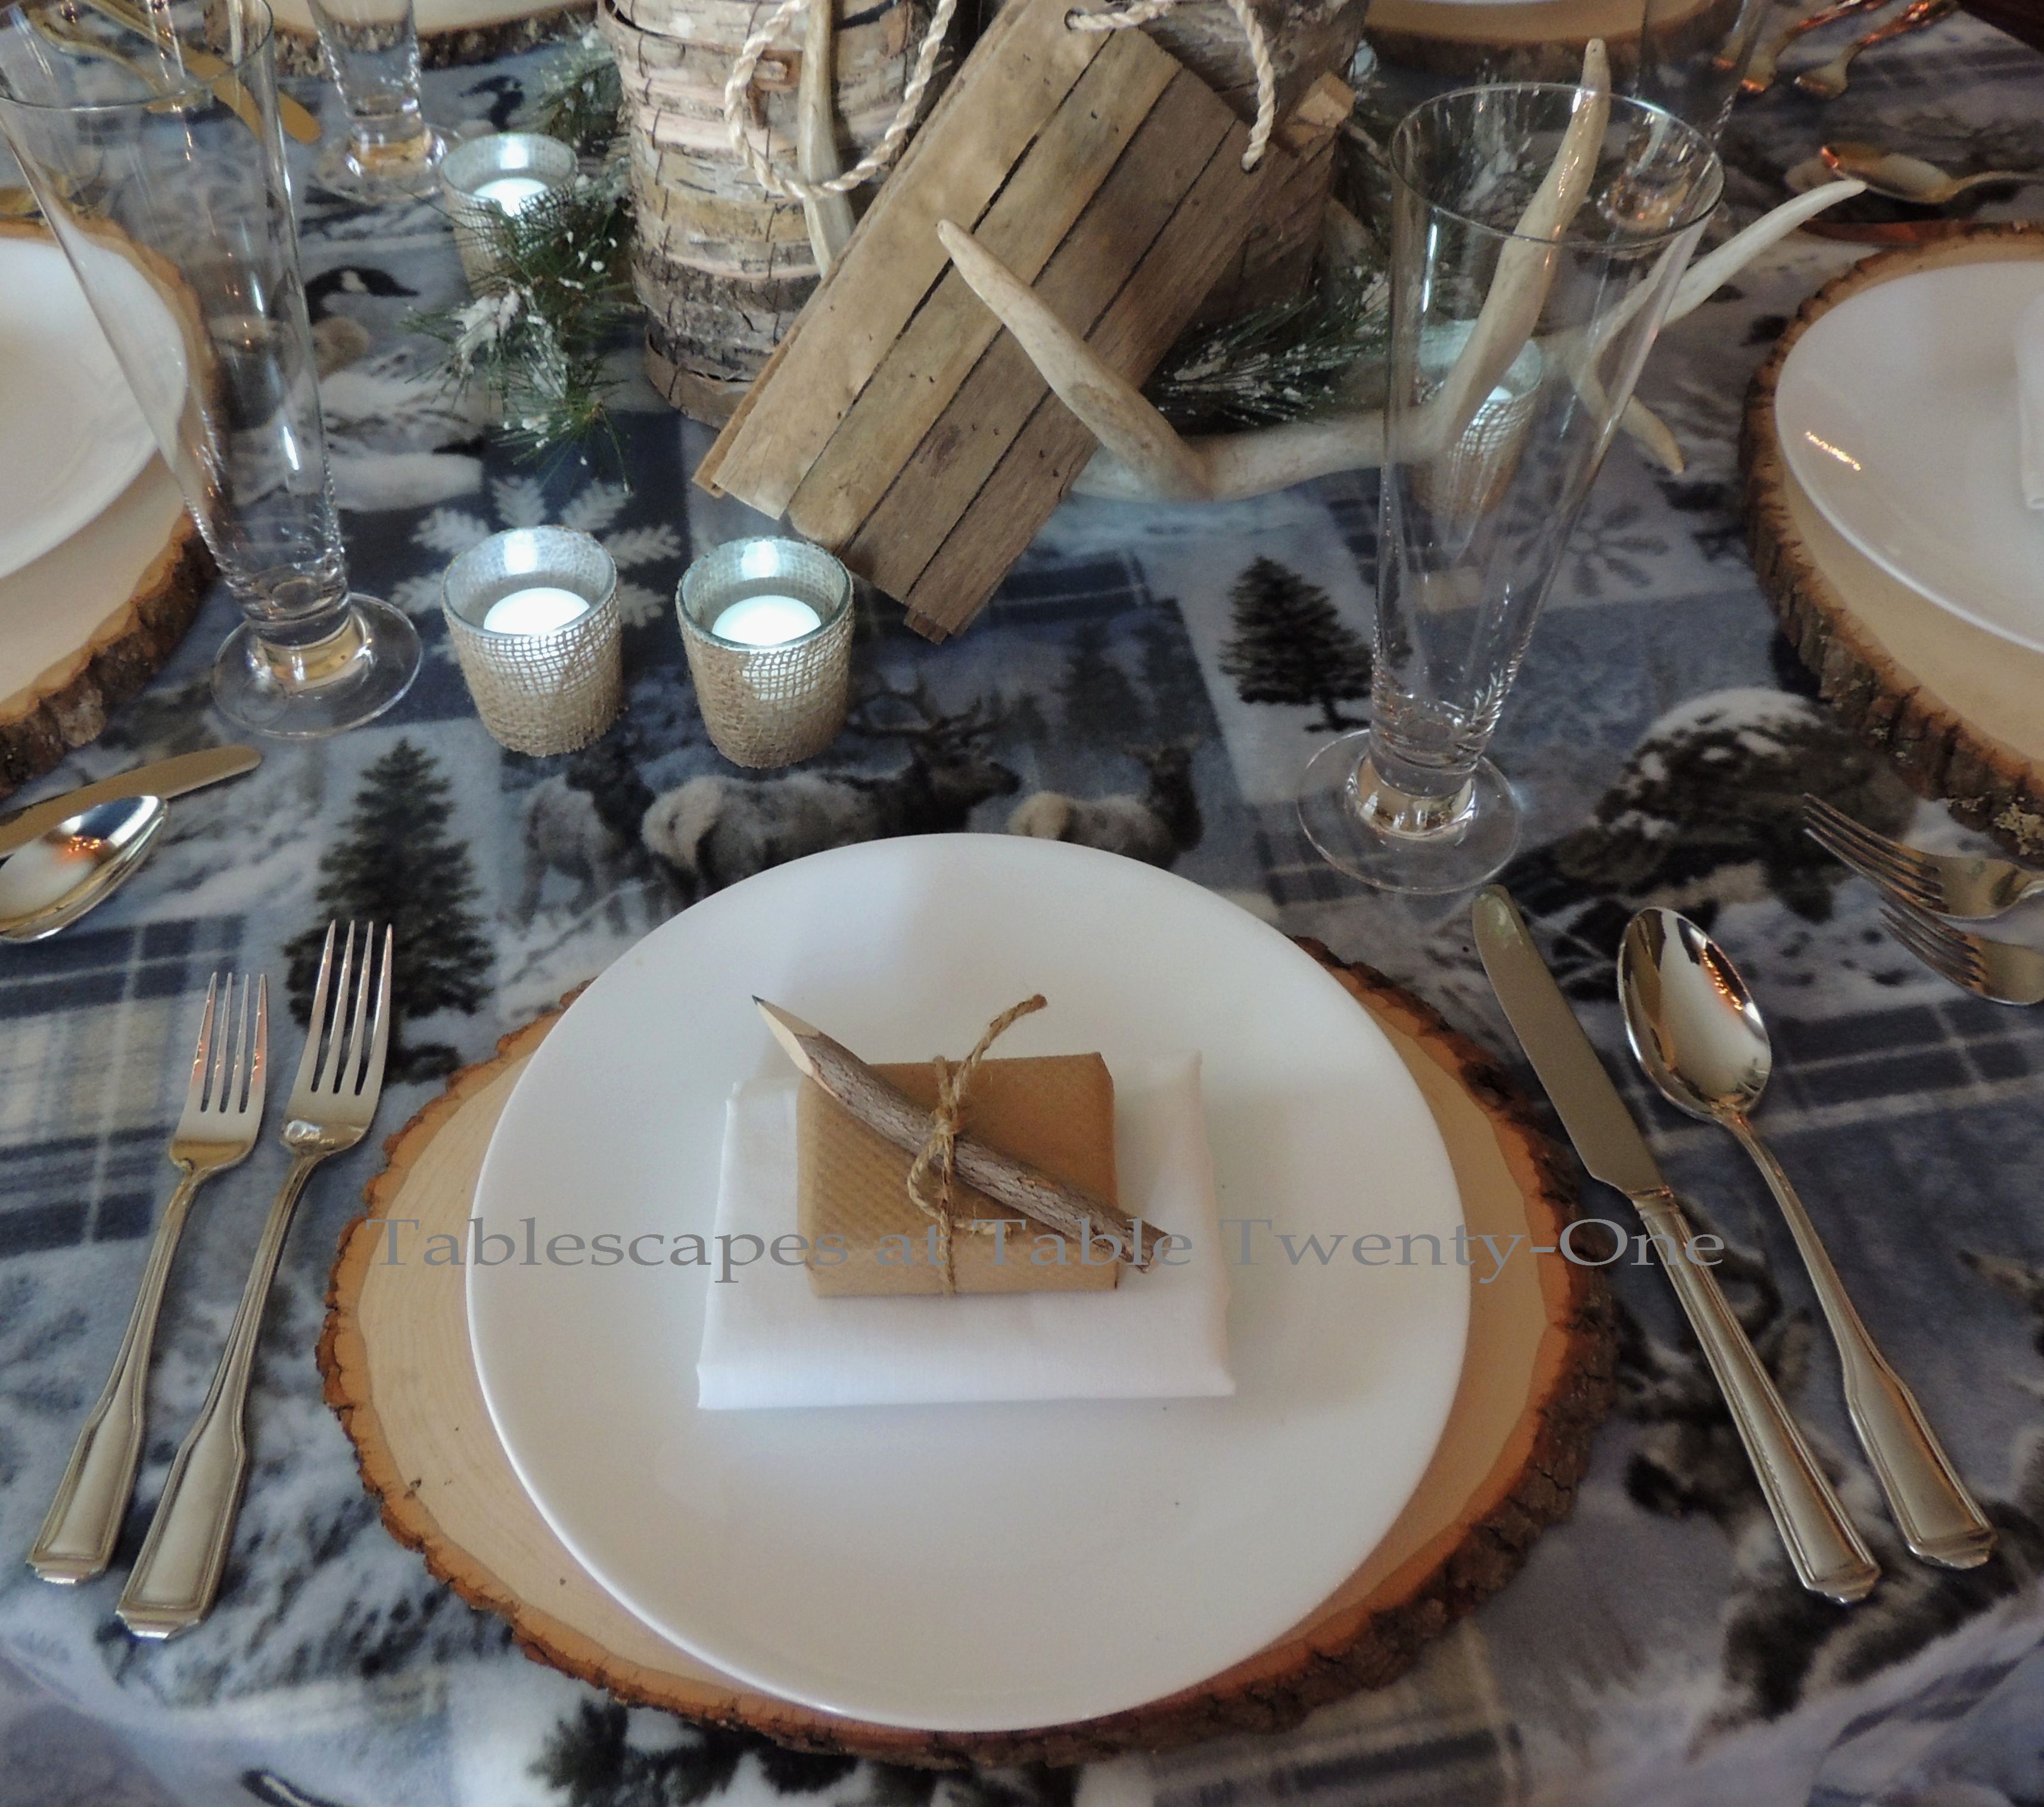 Tablescapes at Table Twenty-One, Woodland Men's Christmas Tablescape: Place setting